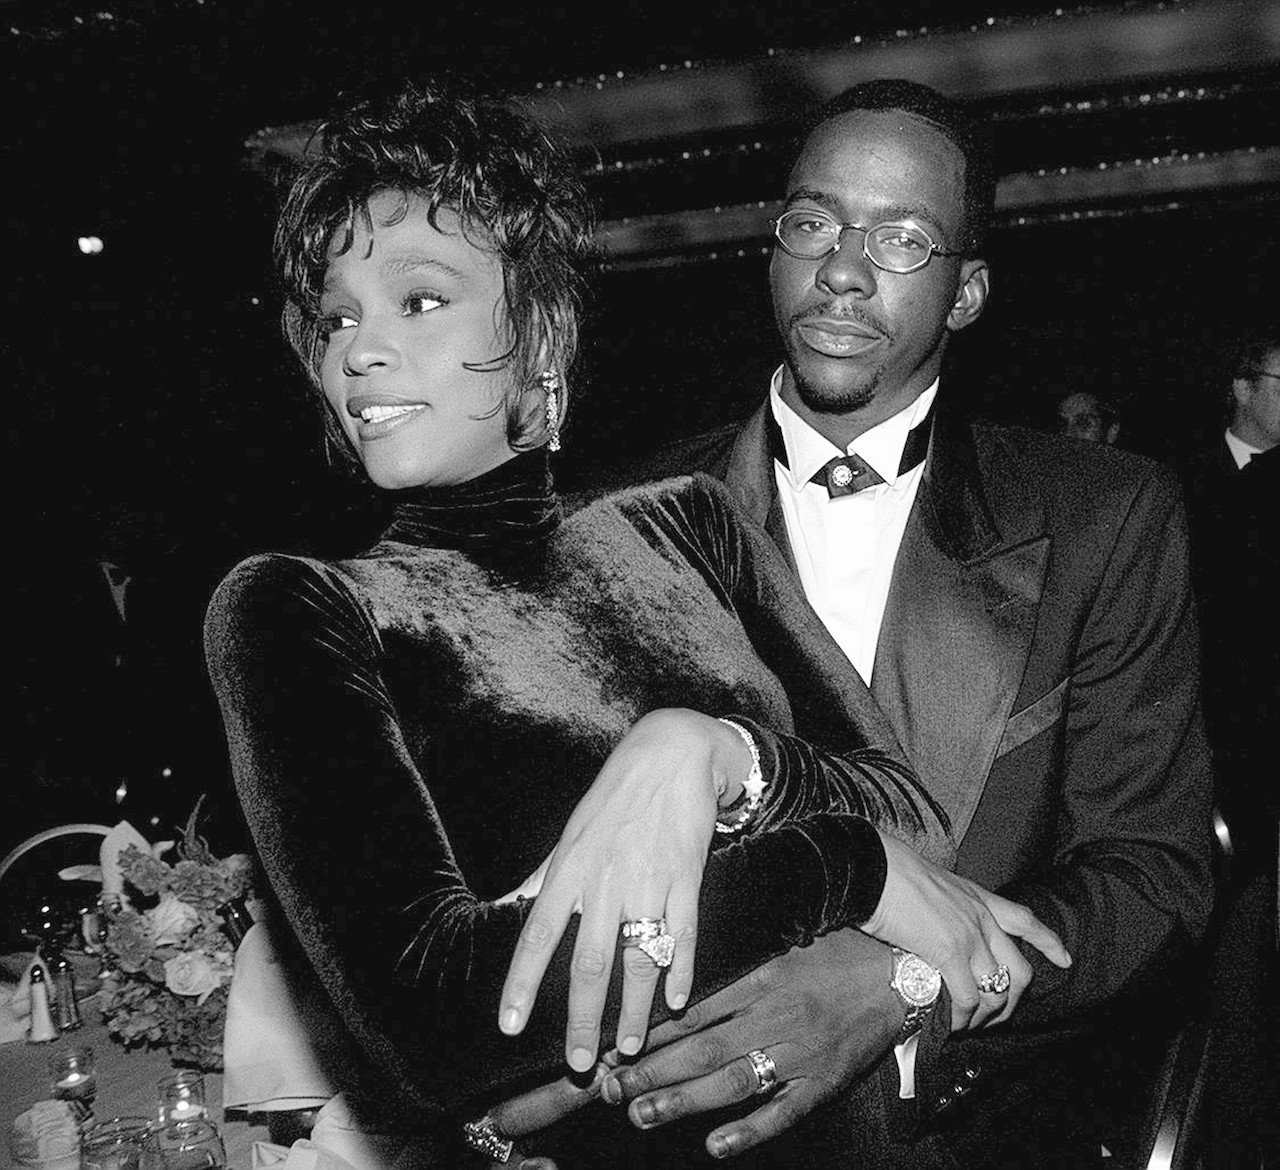 Whitney Houston and Bobby Brown arrend event; Brown says he didn't know Houston was using drugs at the time of her death